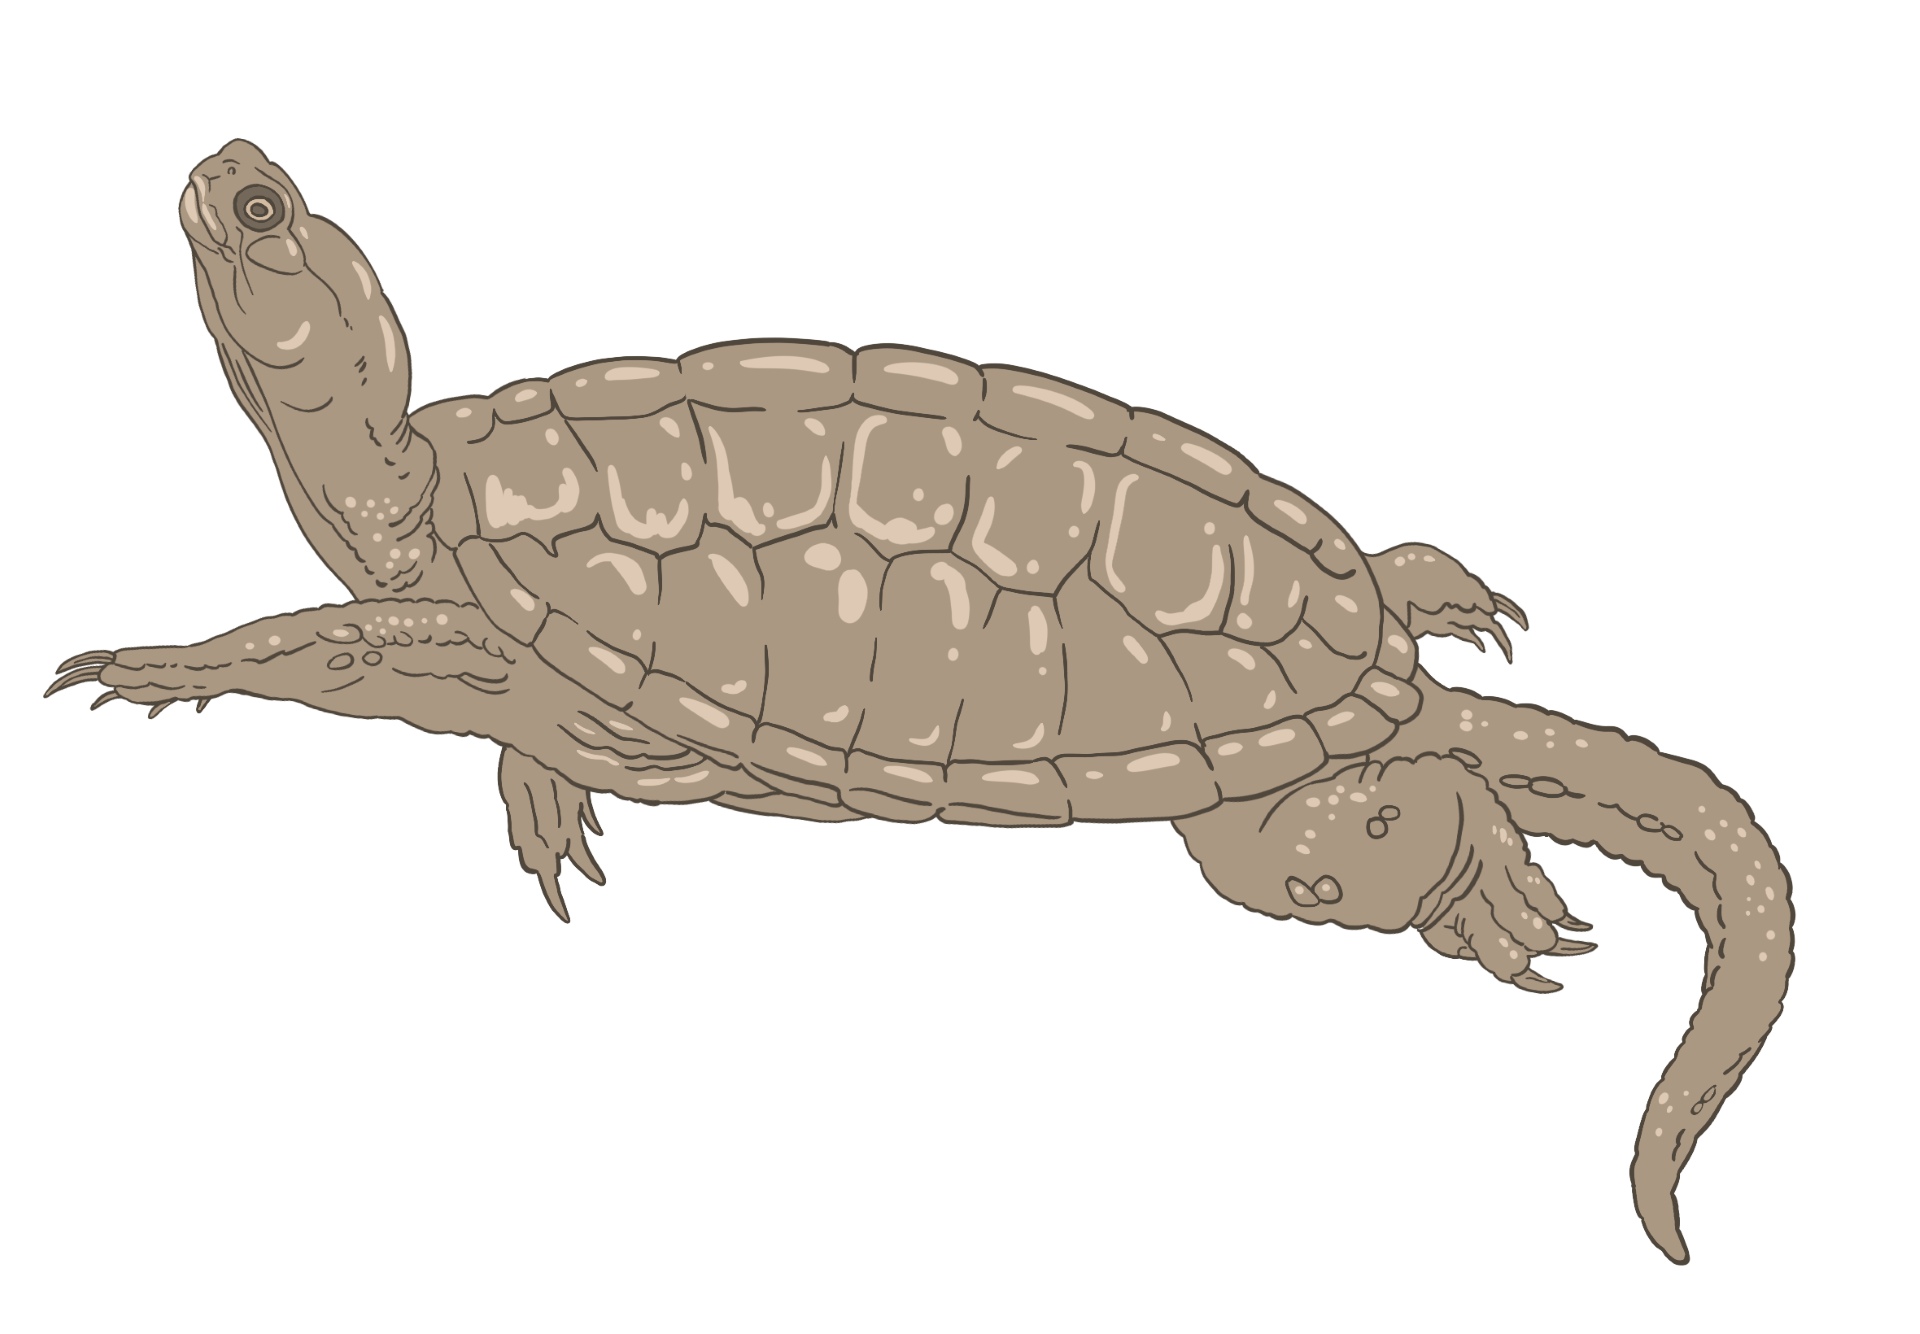 An artist interpretation of how the Jurassic turtle Dinochelys whitei may have looked. The drawing is heavily inspired by modern pond turtles.